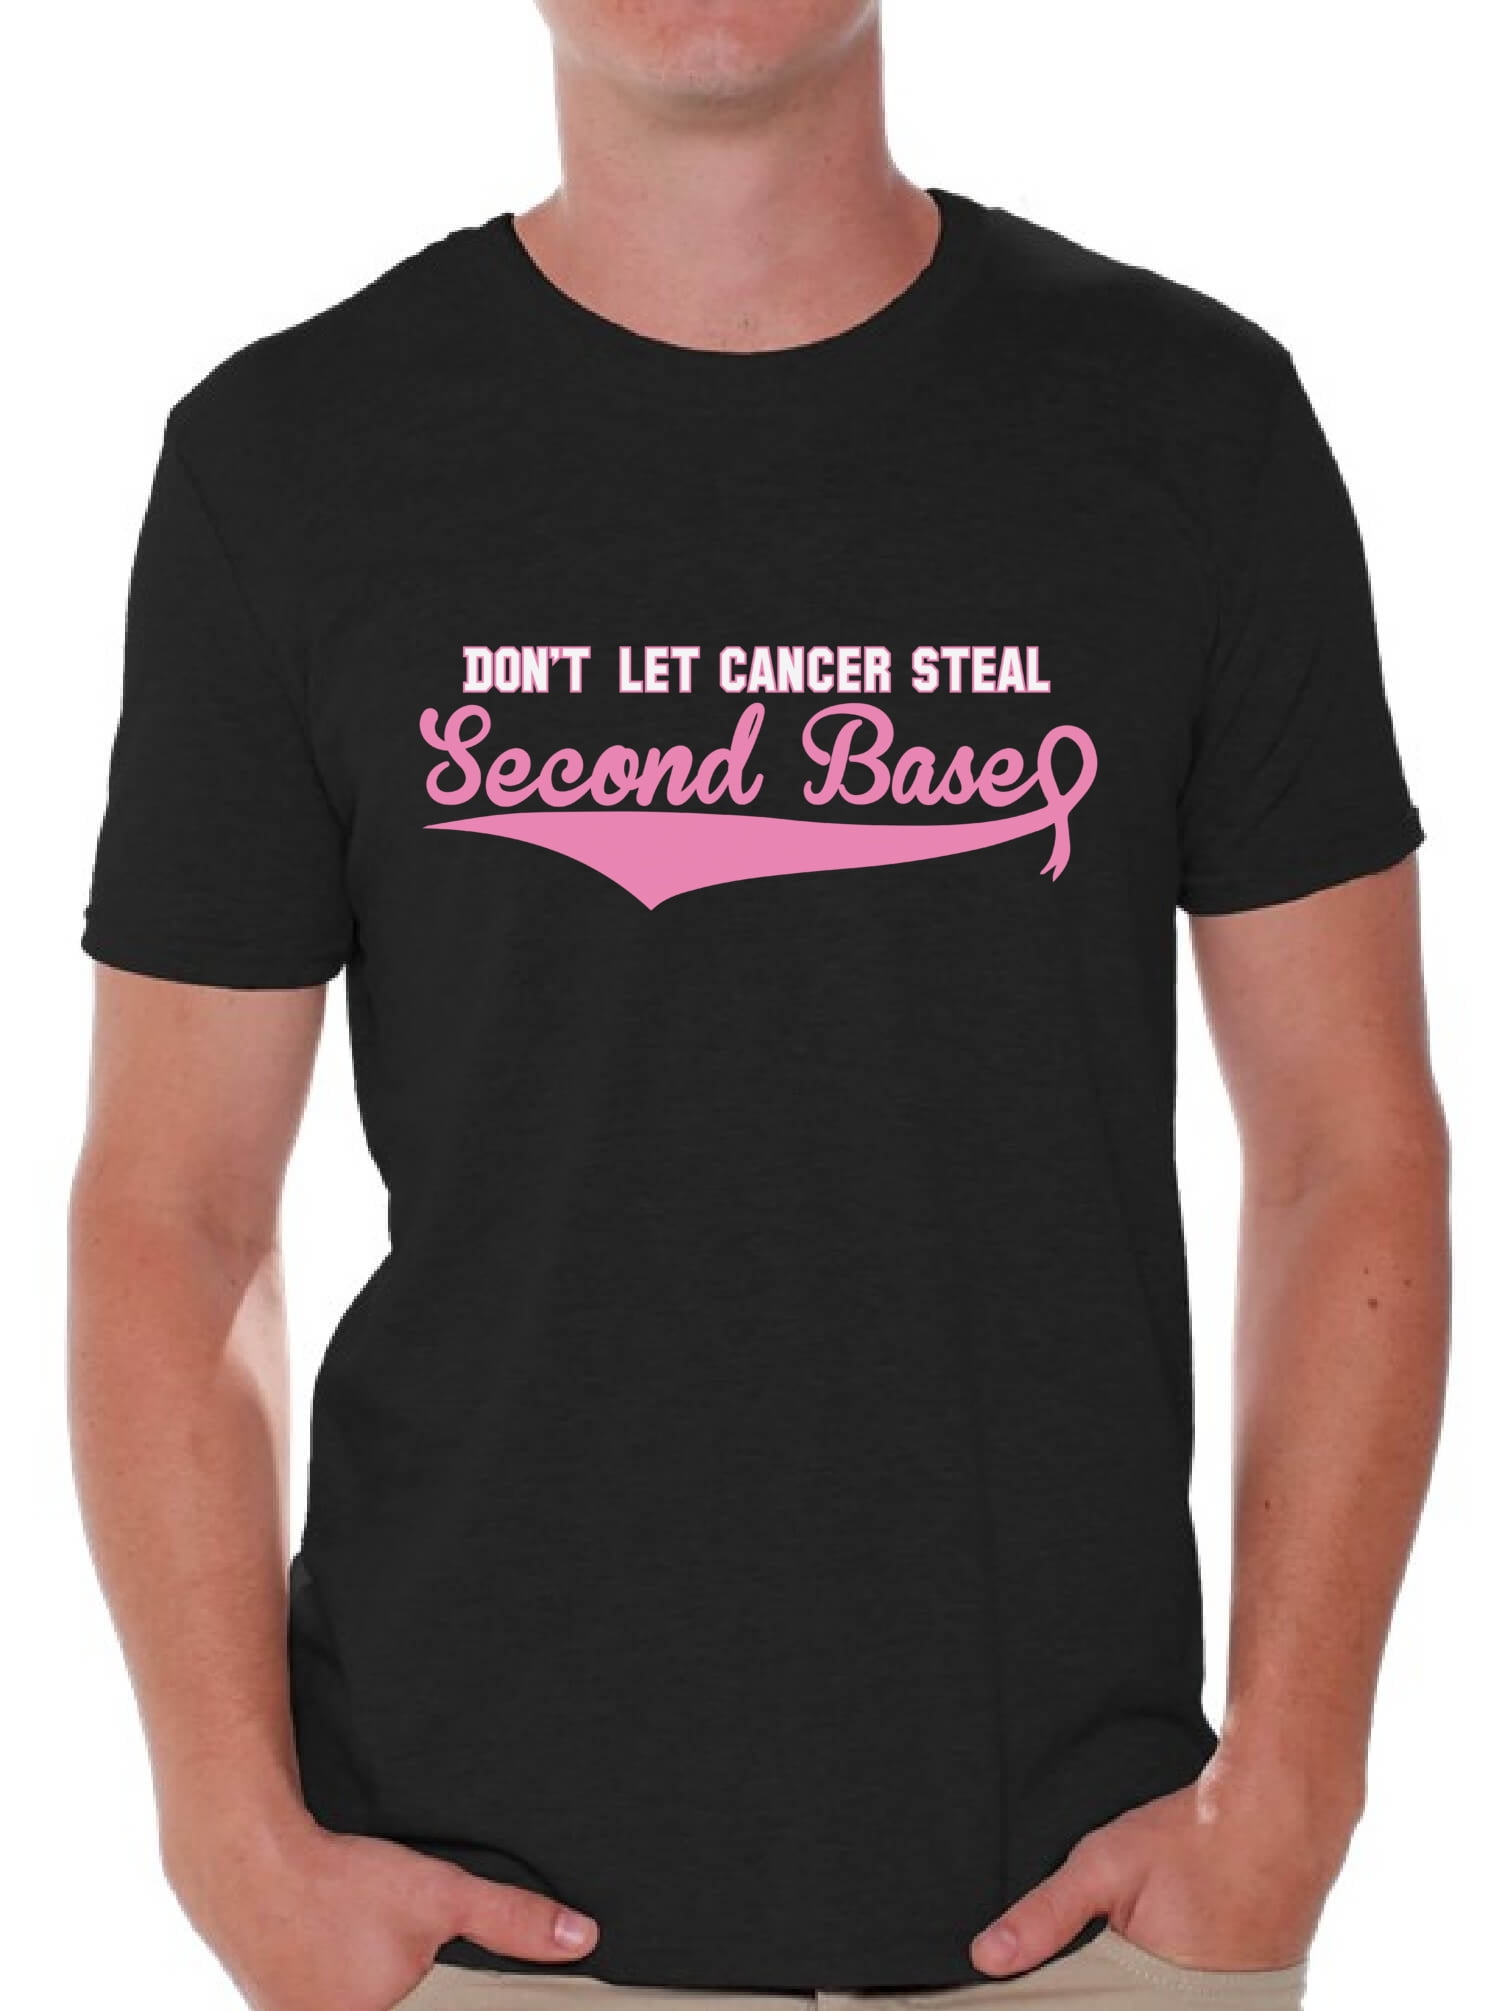 Breast Cancer Shirt Pink Ribbon Shirt Breast Cancer Awareness Shirt Funny Tshirt Lovely Tee Father's Day Shirts Unisex Tank Top Men